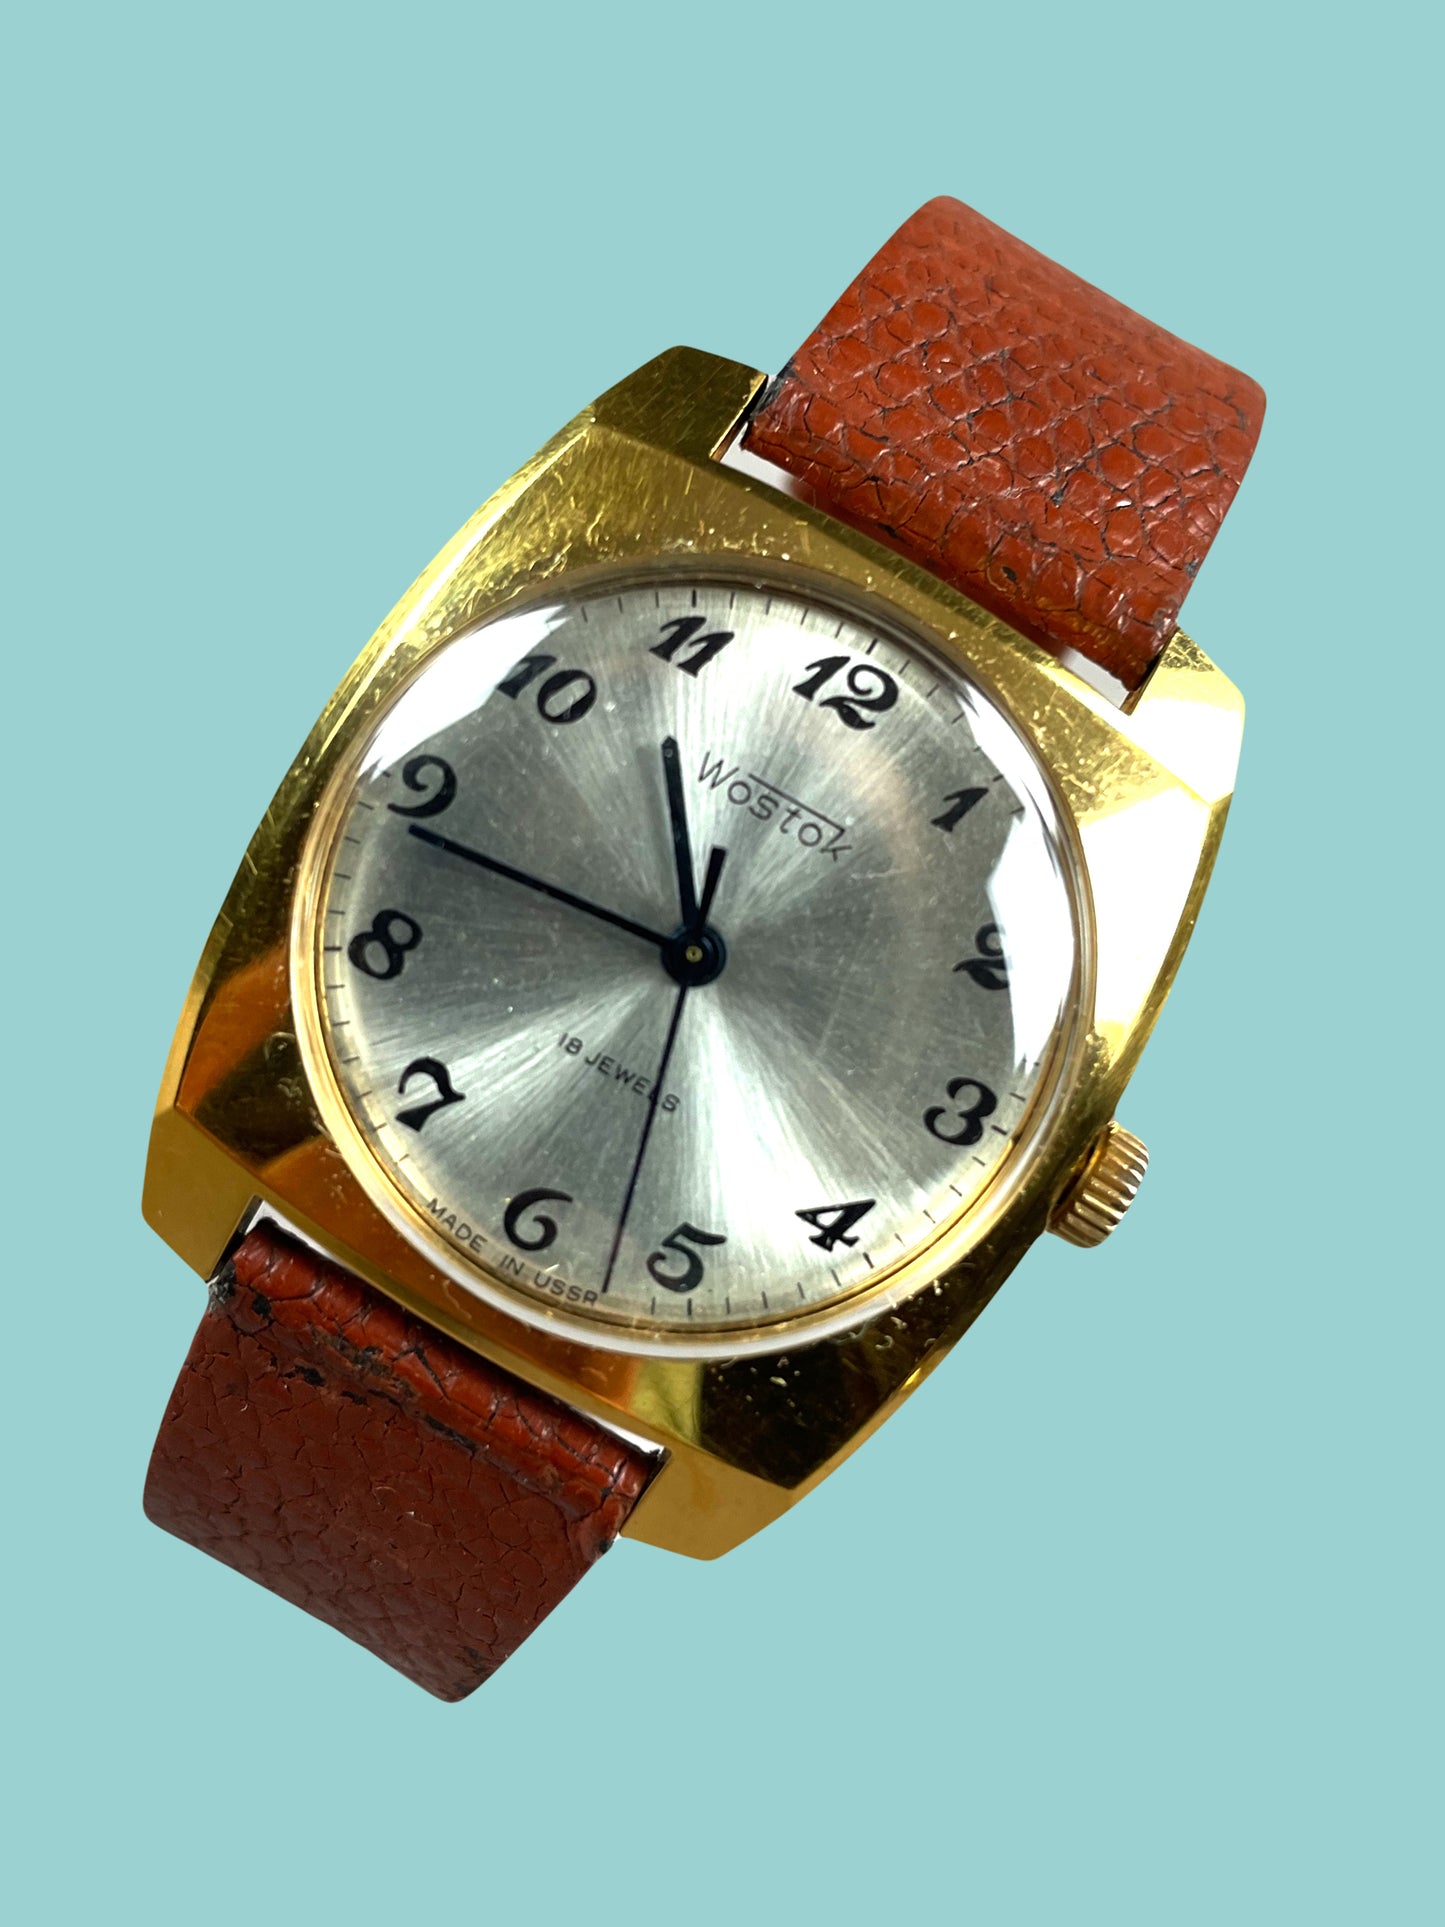 Vostok mechanical watch with gold case